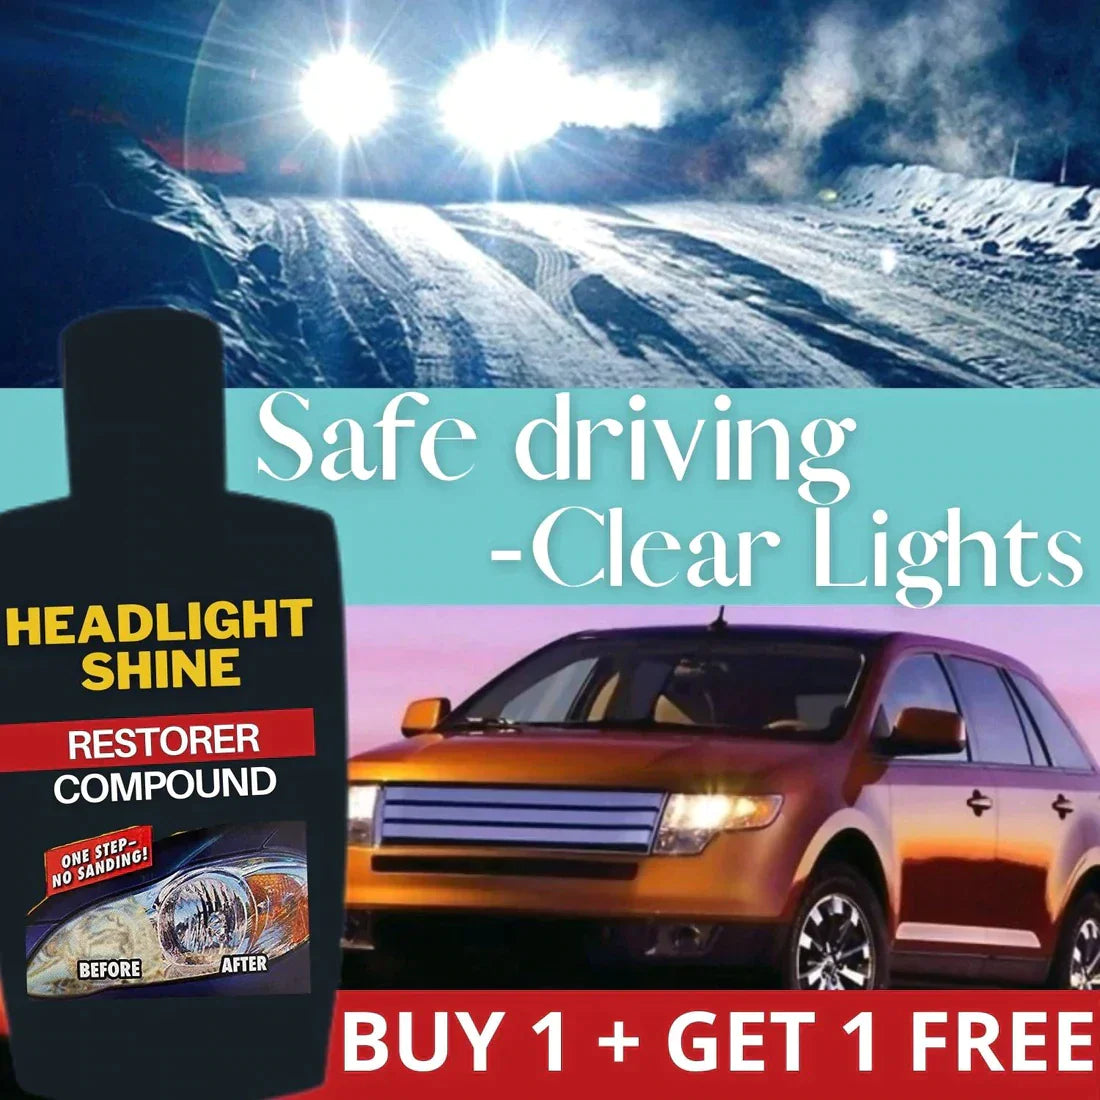 COMPOUND FOR RESTORING CAR HEADLIGHTS ** BUY 1 GET 1 FREE **